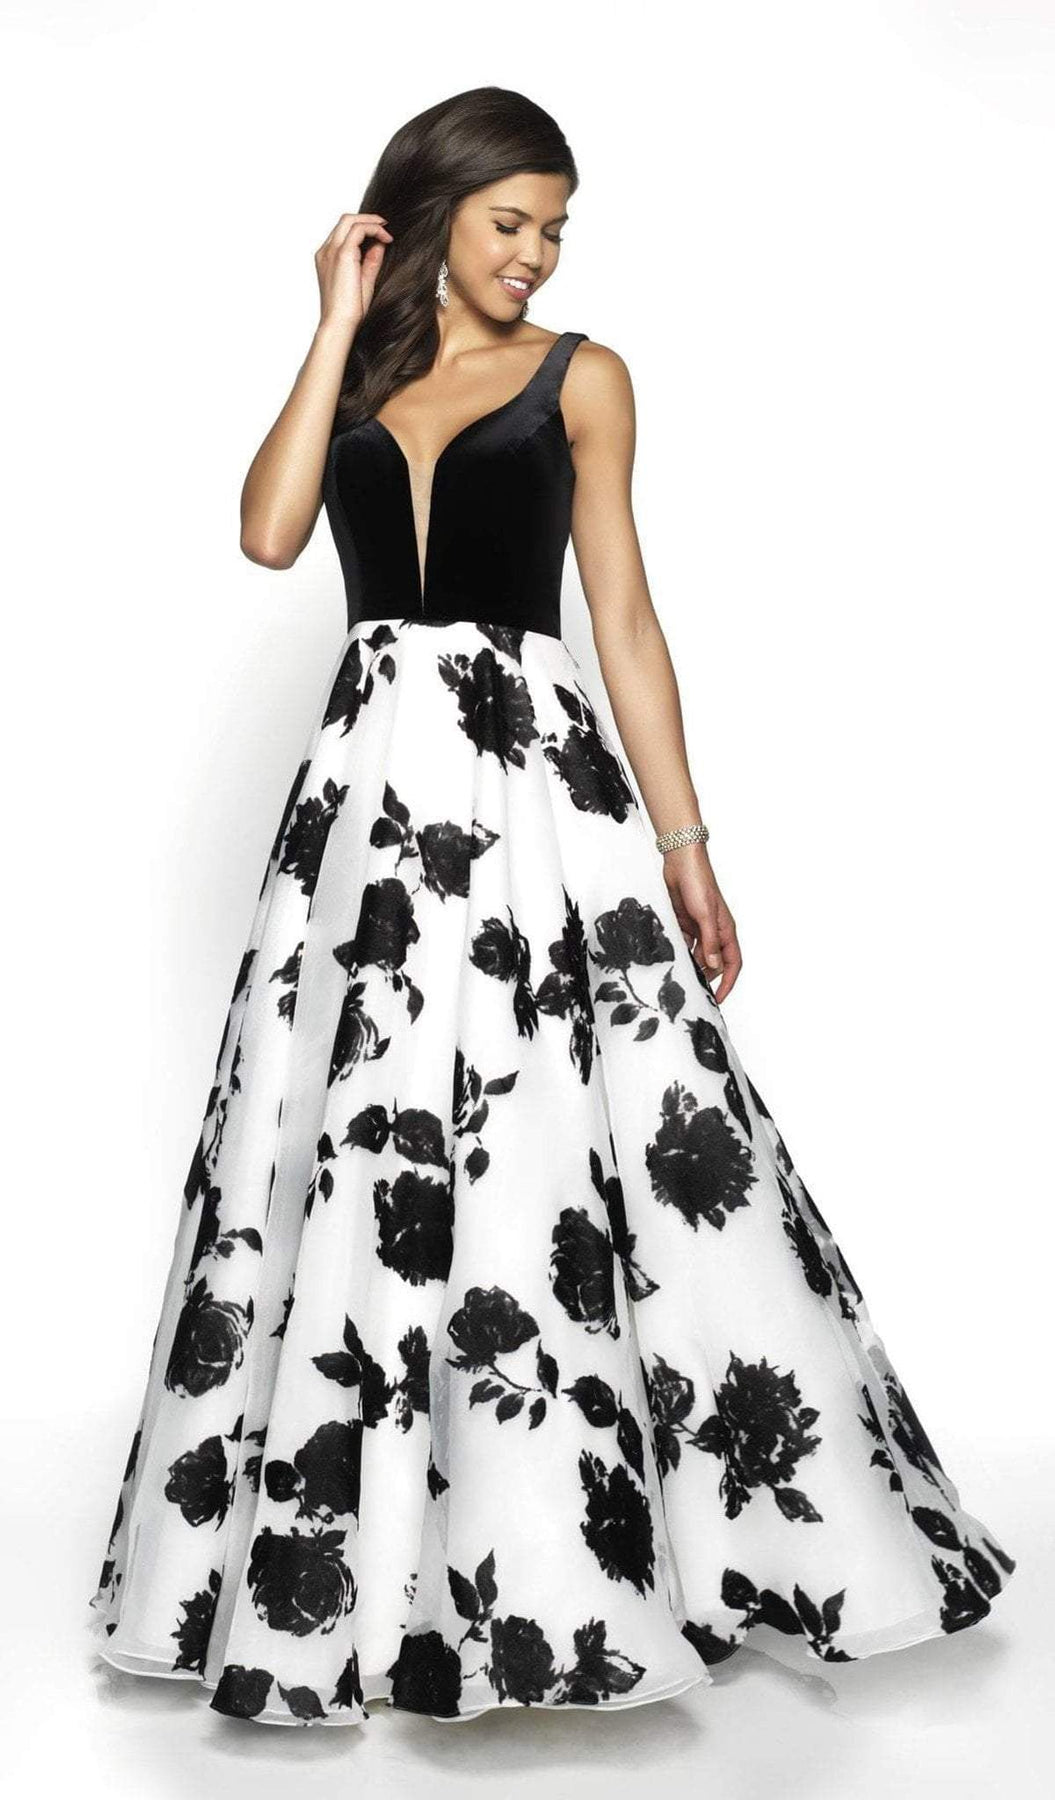 Blush by Alexia Designs - 5714 Plunging V-Neck Floral Dress Prom Dresses 0 / Off White/Black